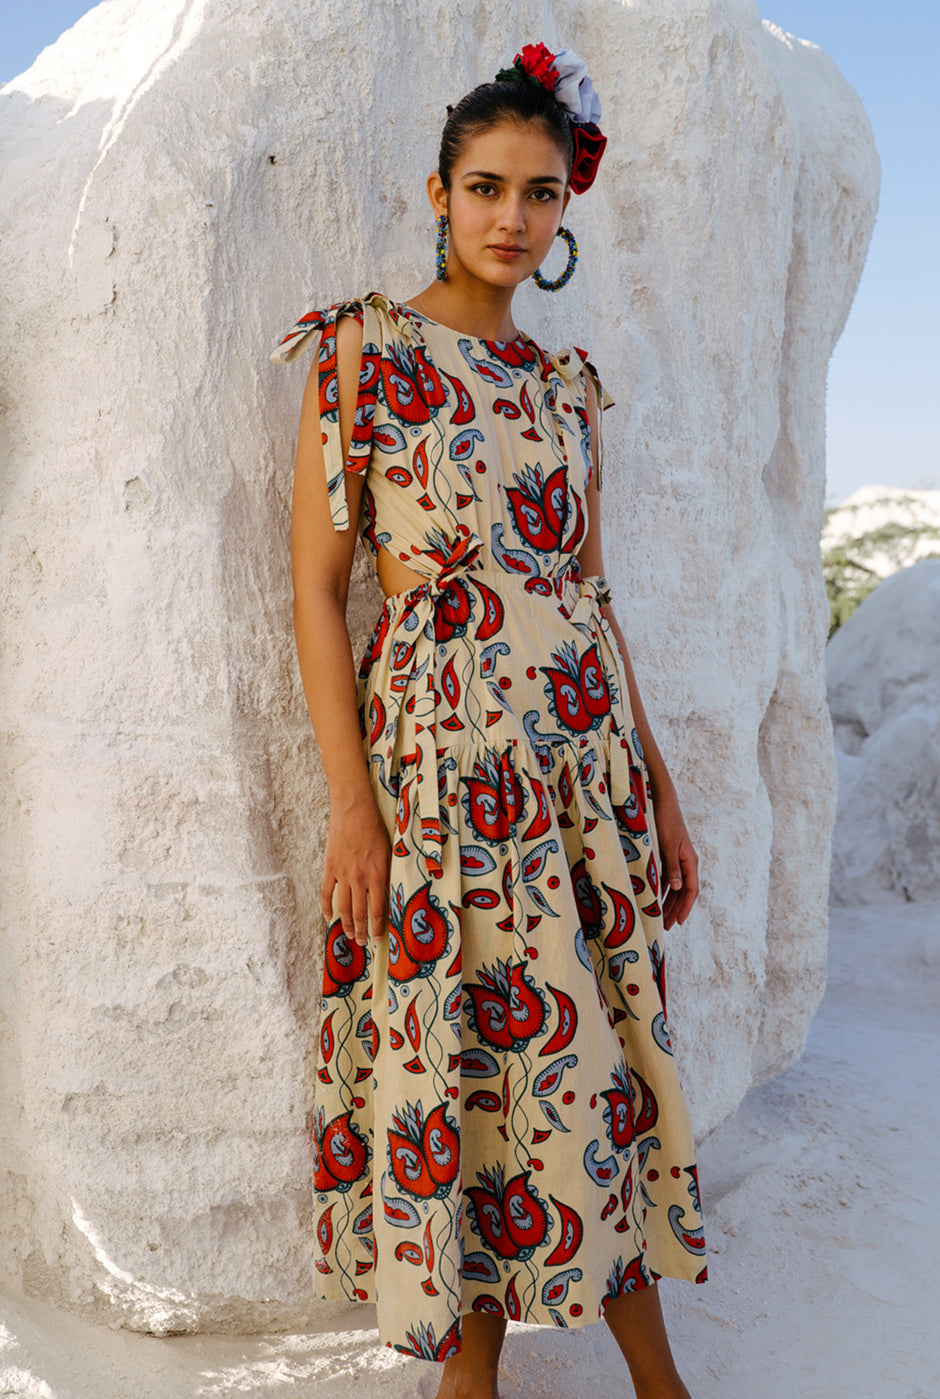 Shop handcrafted printed dresses | JODI Life – Page 2